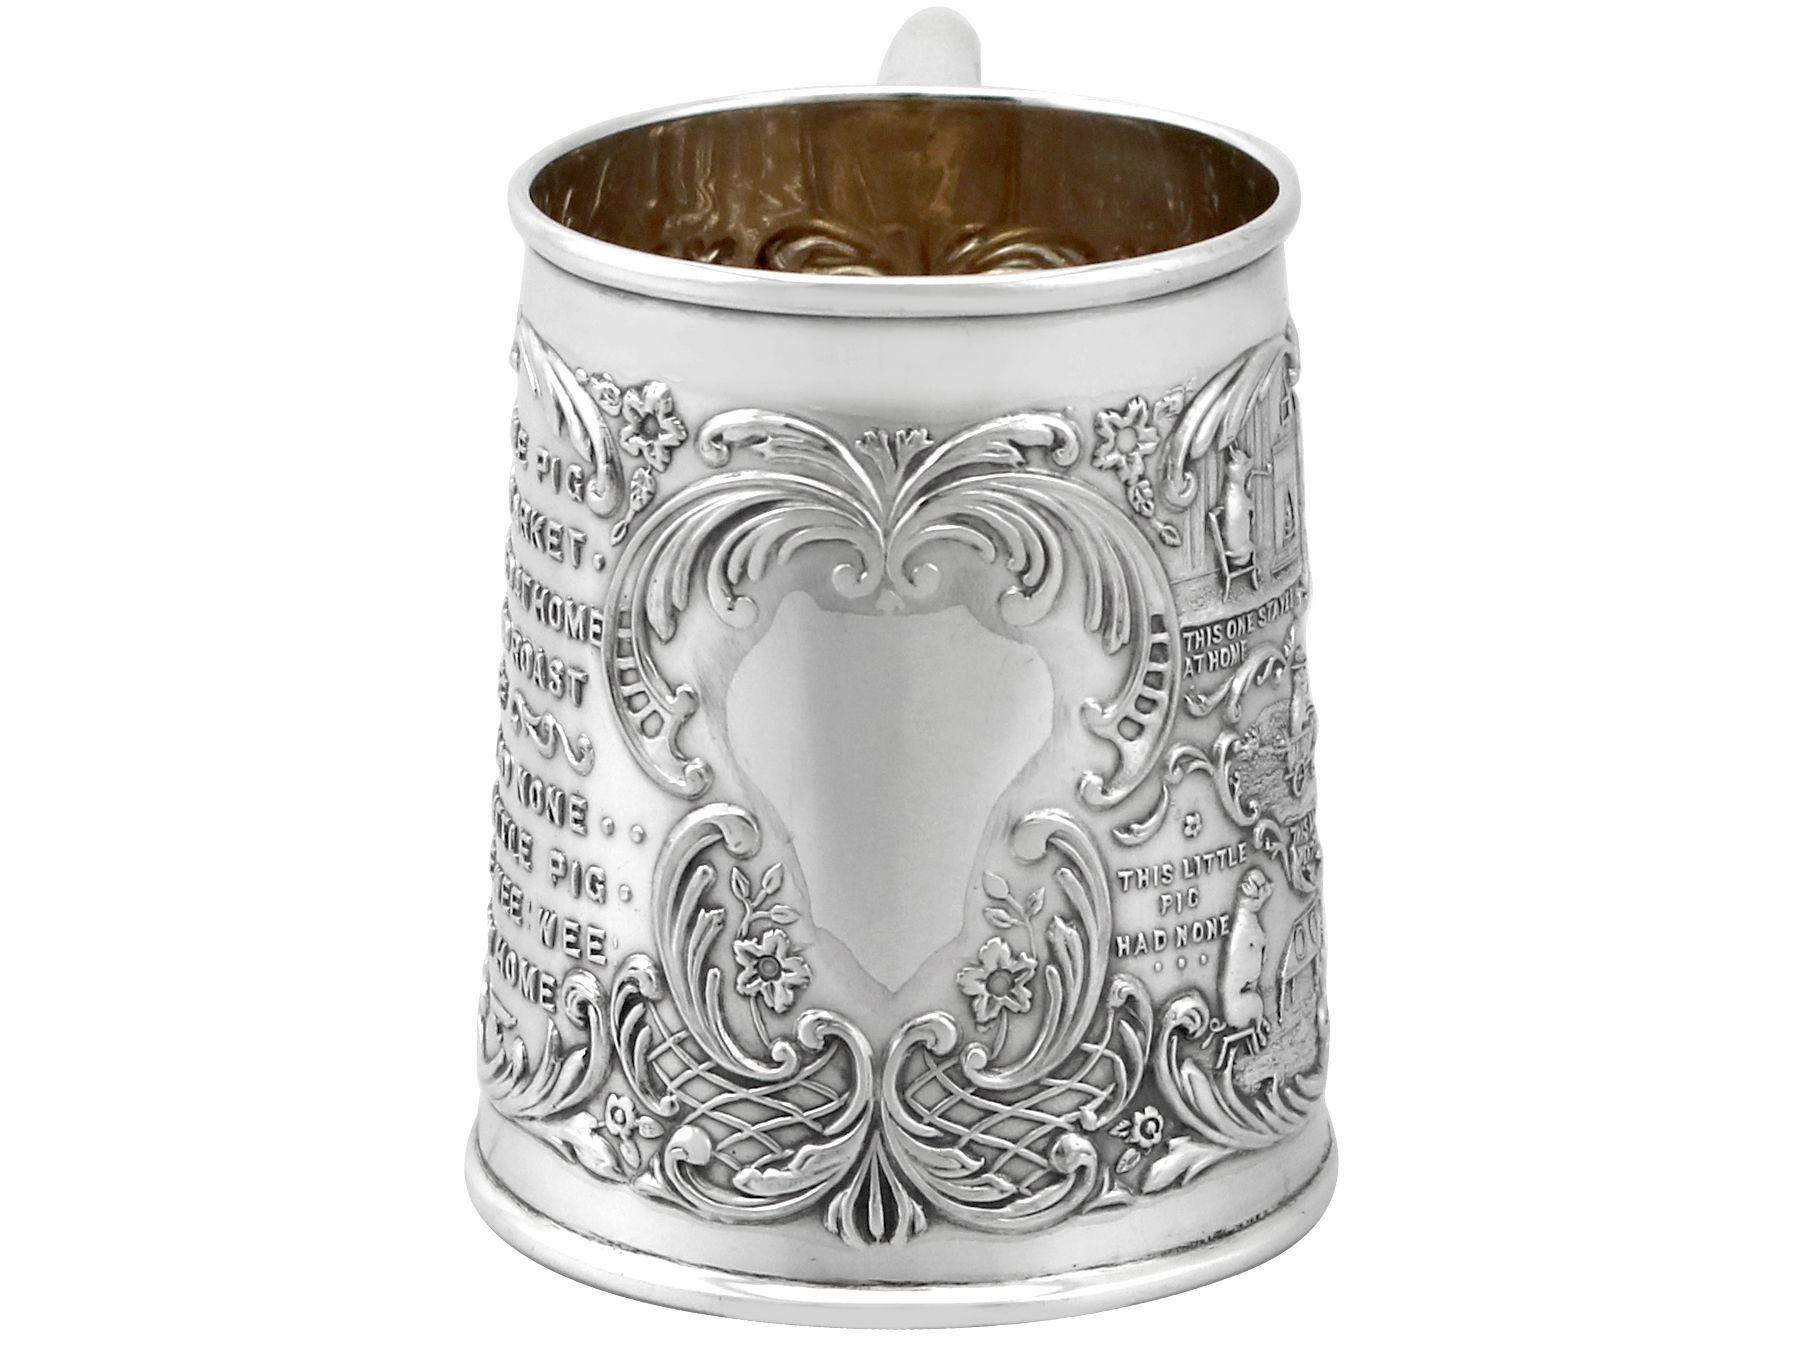 An exceptional, fine and impressive antique Edwardian English sterling silver christening mug; an addition to our silver presentation collection.

This exceptional antique Edwardian sterling silver christening mug has a tapering cylindrical